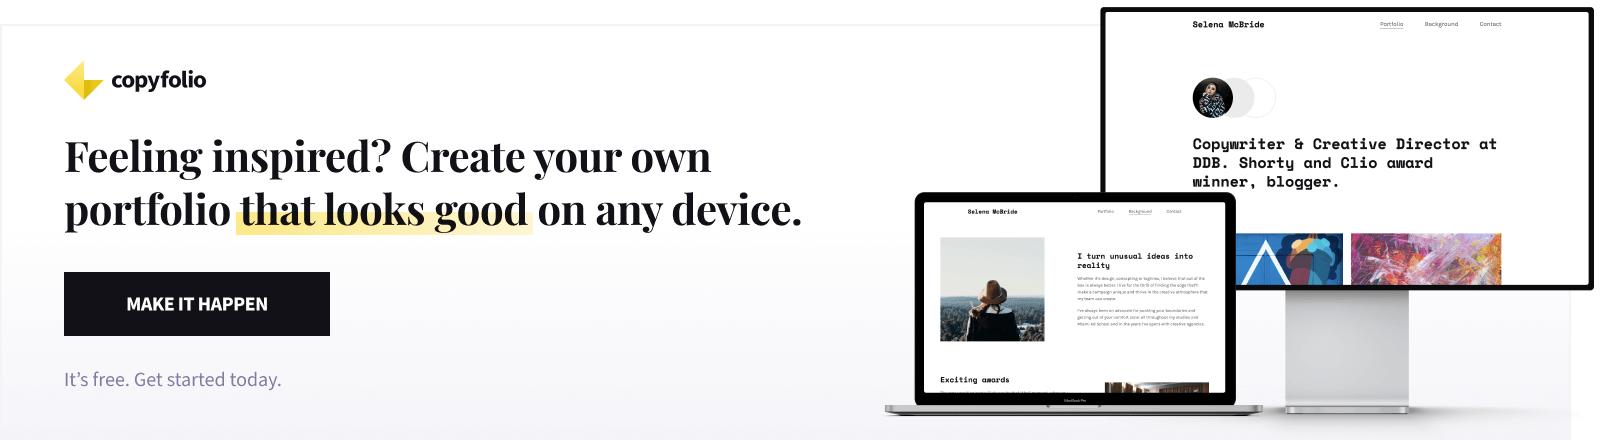 Feeling inspired? Create your own portfolio that looks good on any device. Make it happen. It's free.